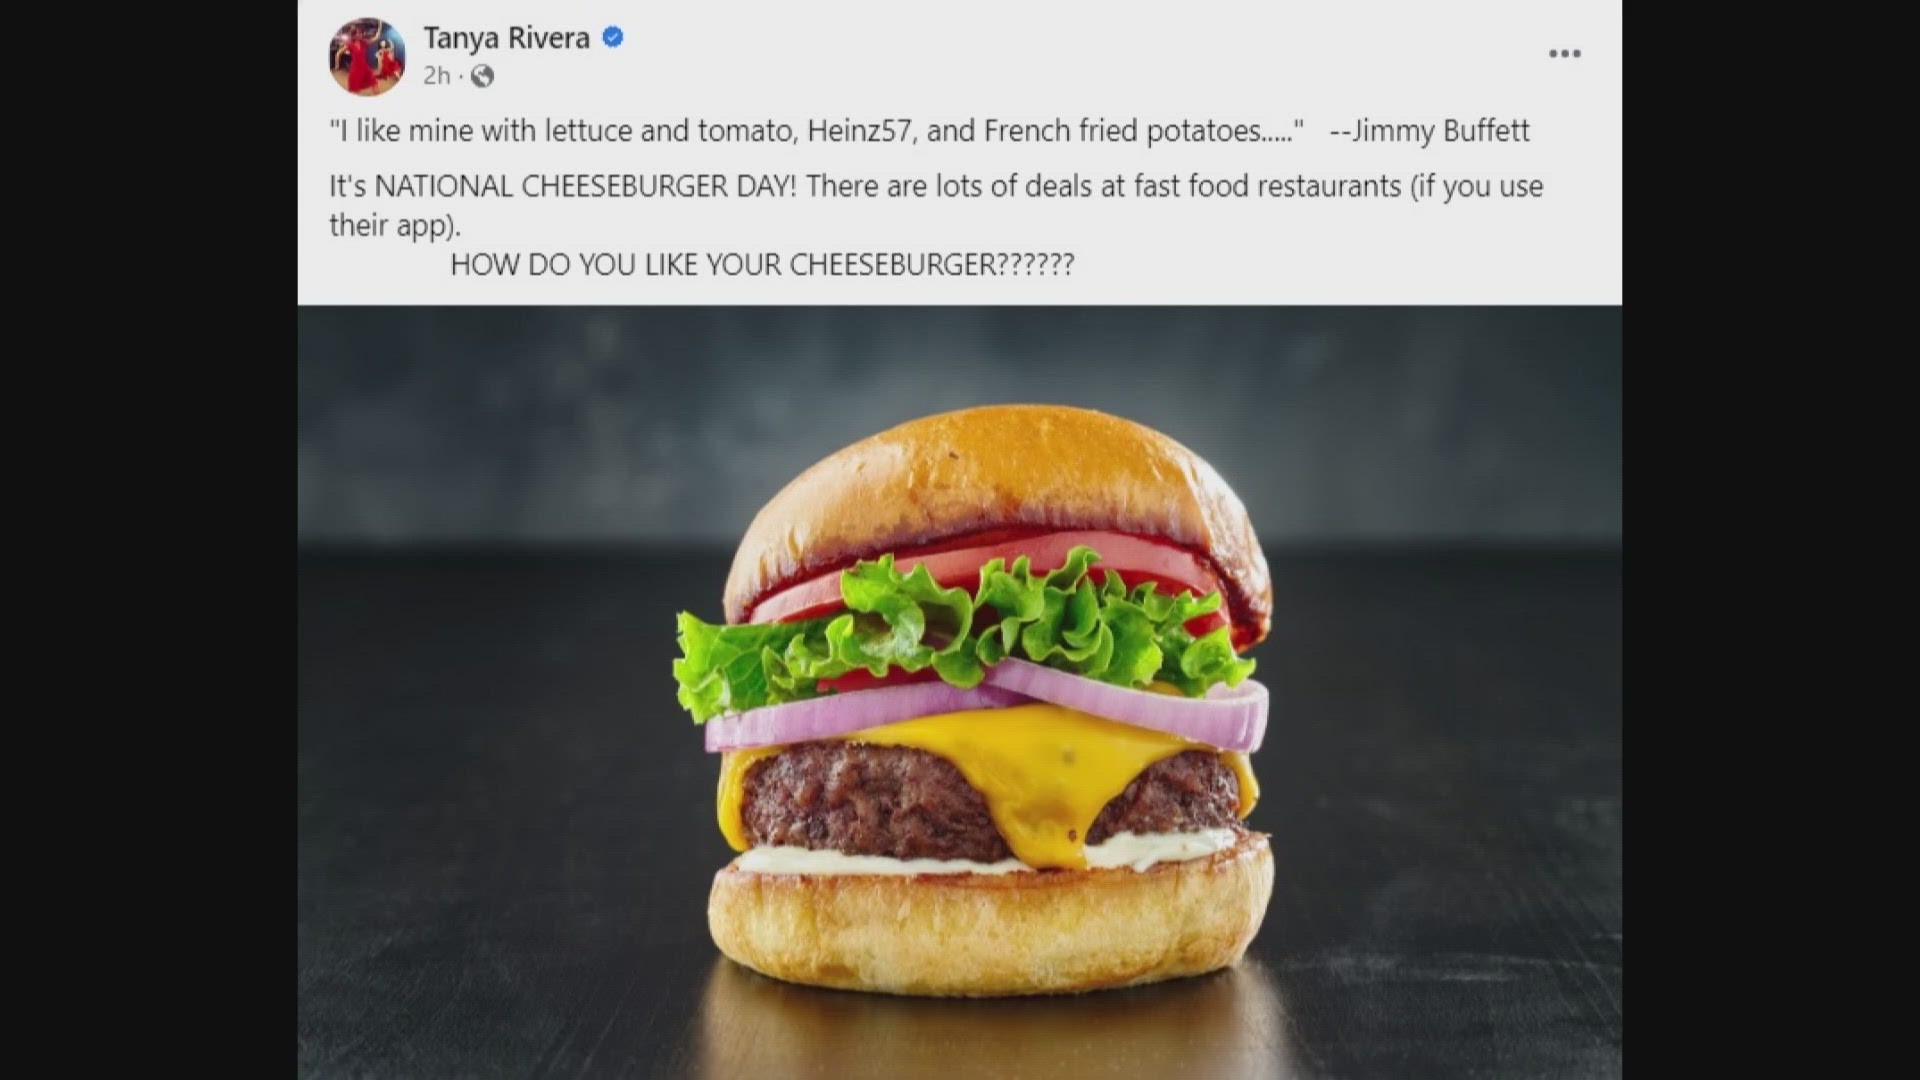 It's National Cheeseburger Day, and franchises are offering deals as long as you use their app.